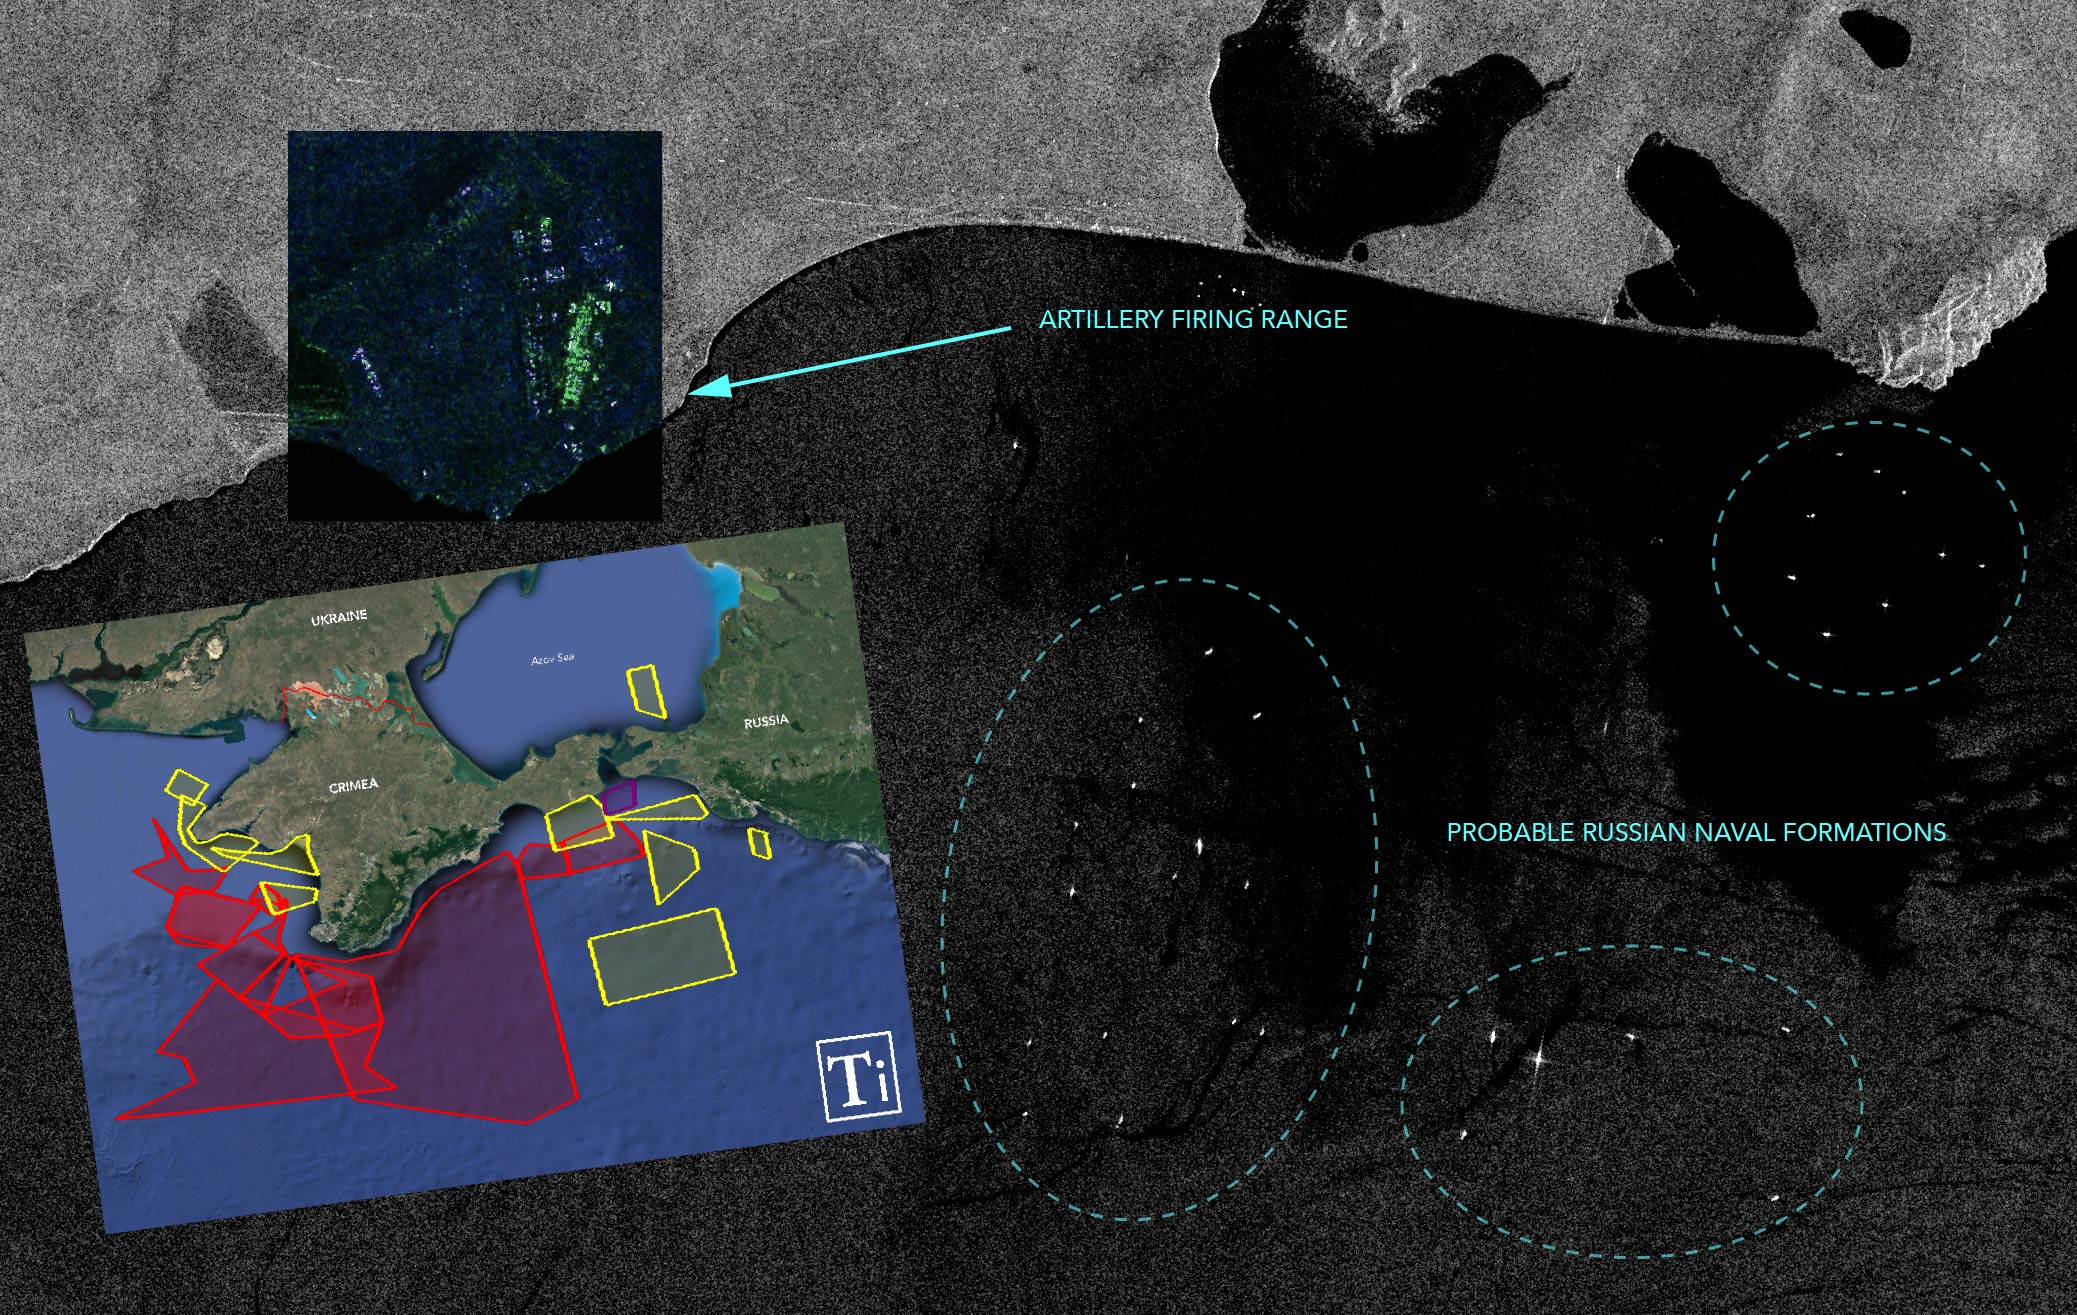 "Do Not Enter:" Using OSINT to Monitor Russia's Wargames in the Black Sea